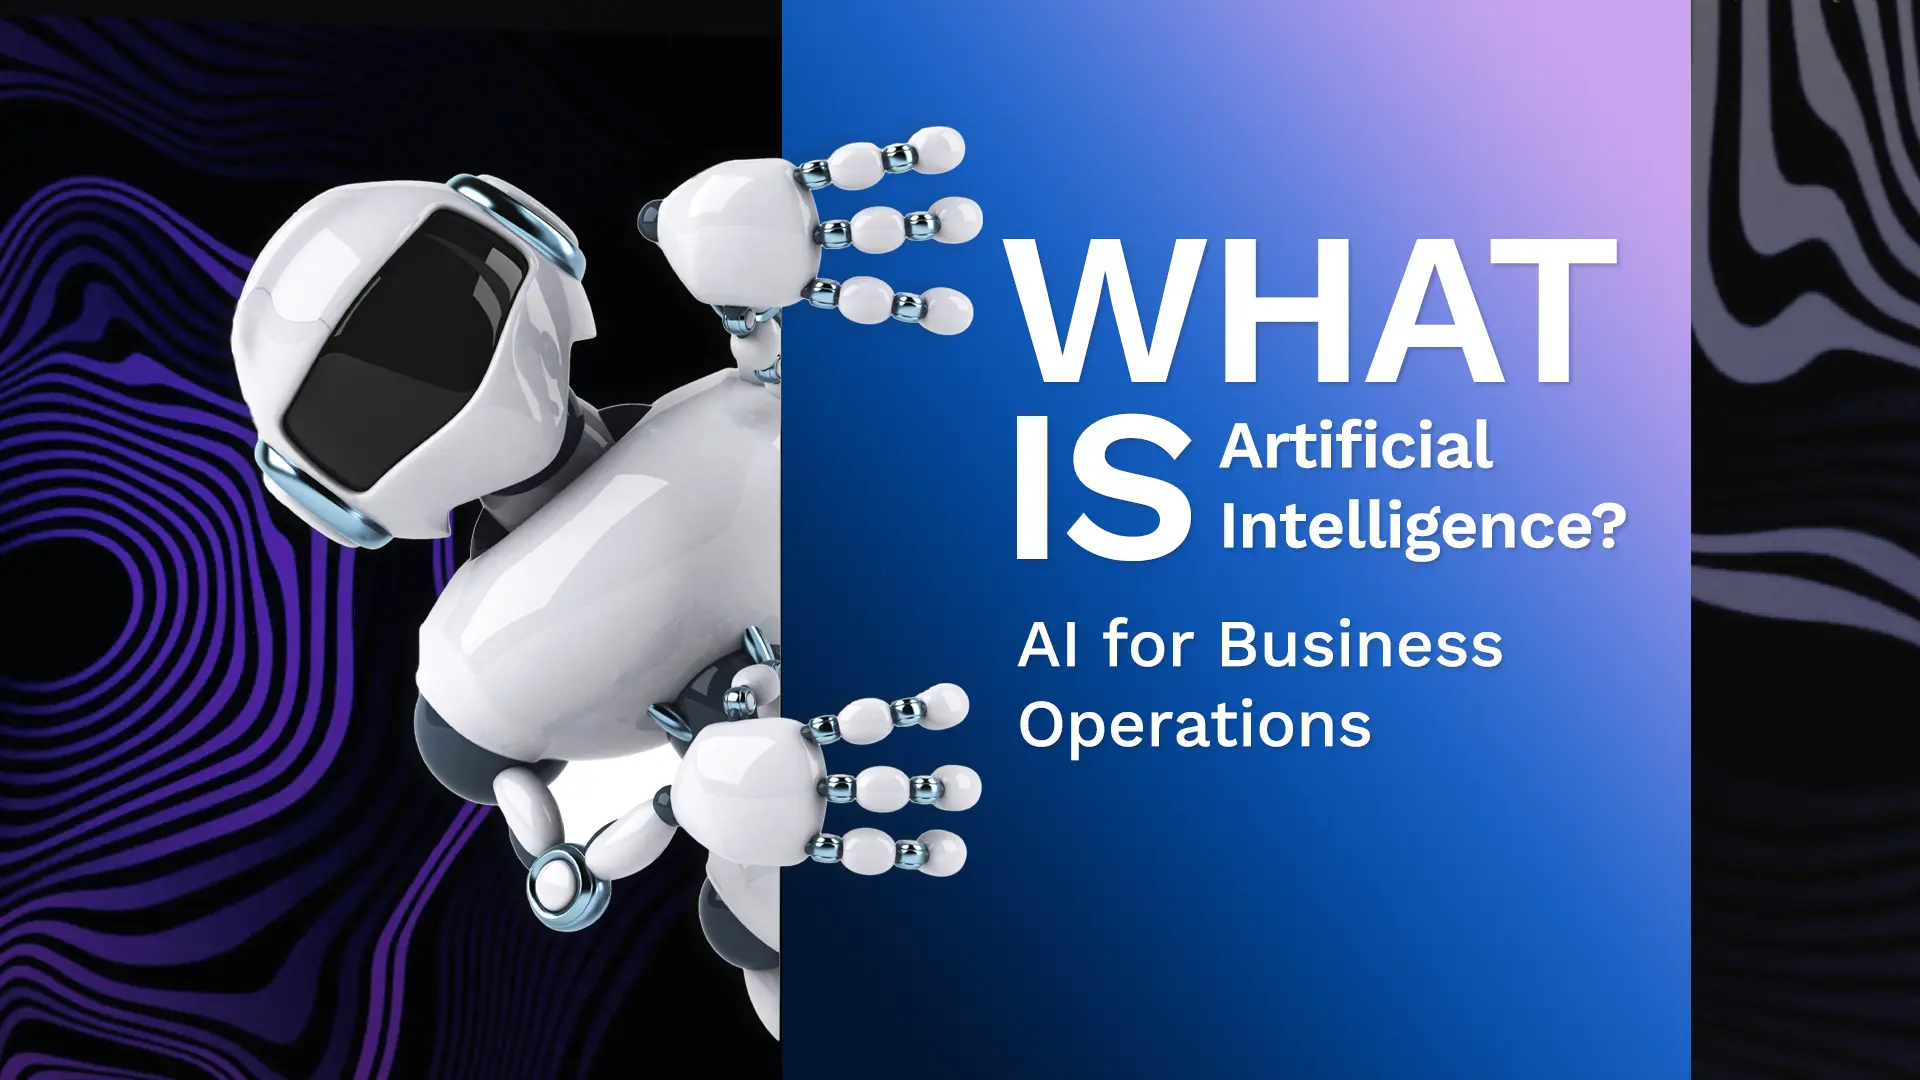 What Is Artificial Intelligence And How Has It Streamlined Everyday Business Operations?